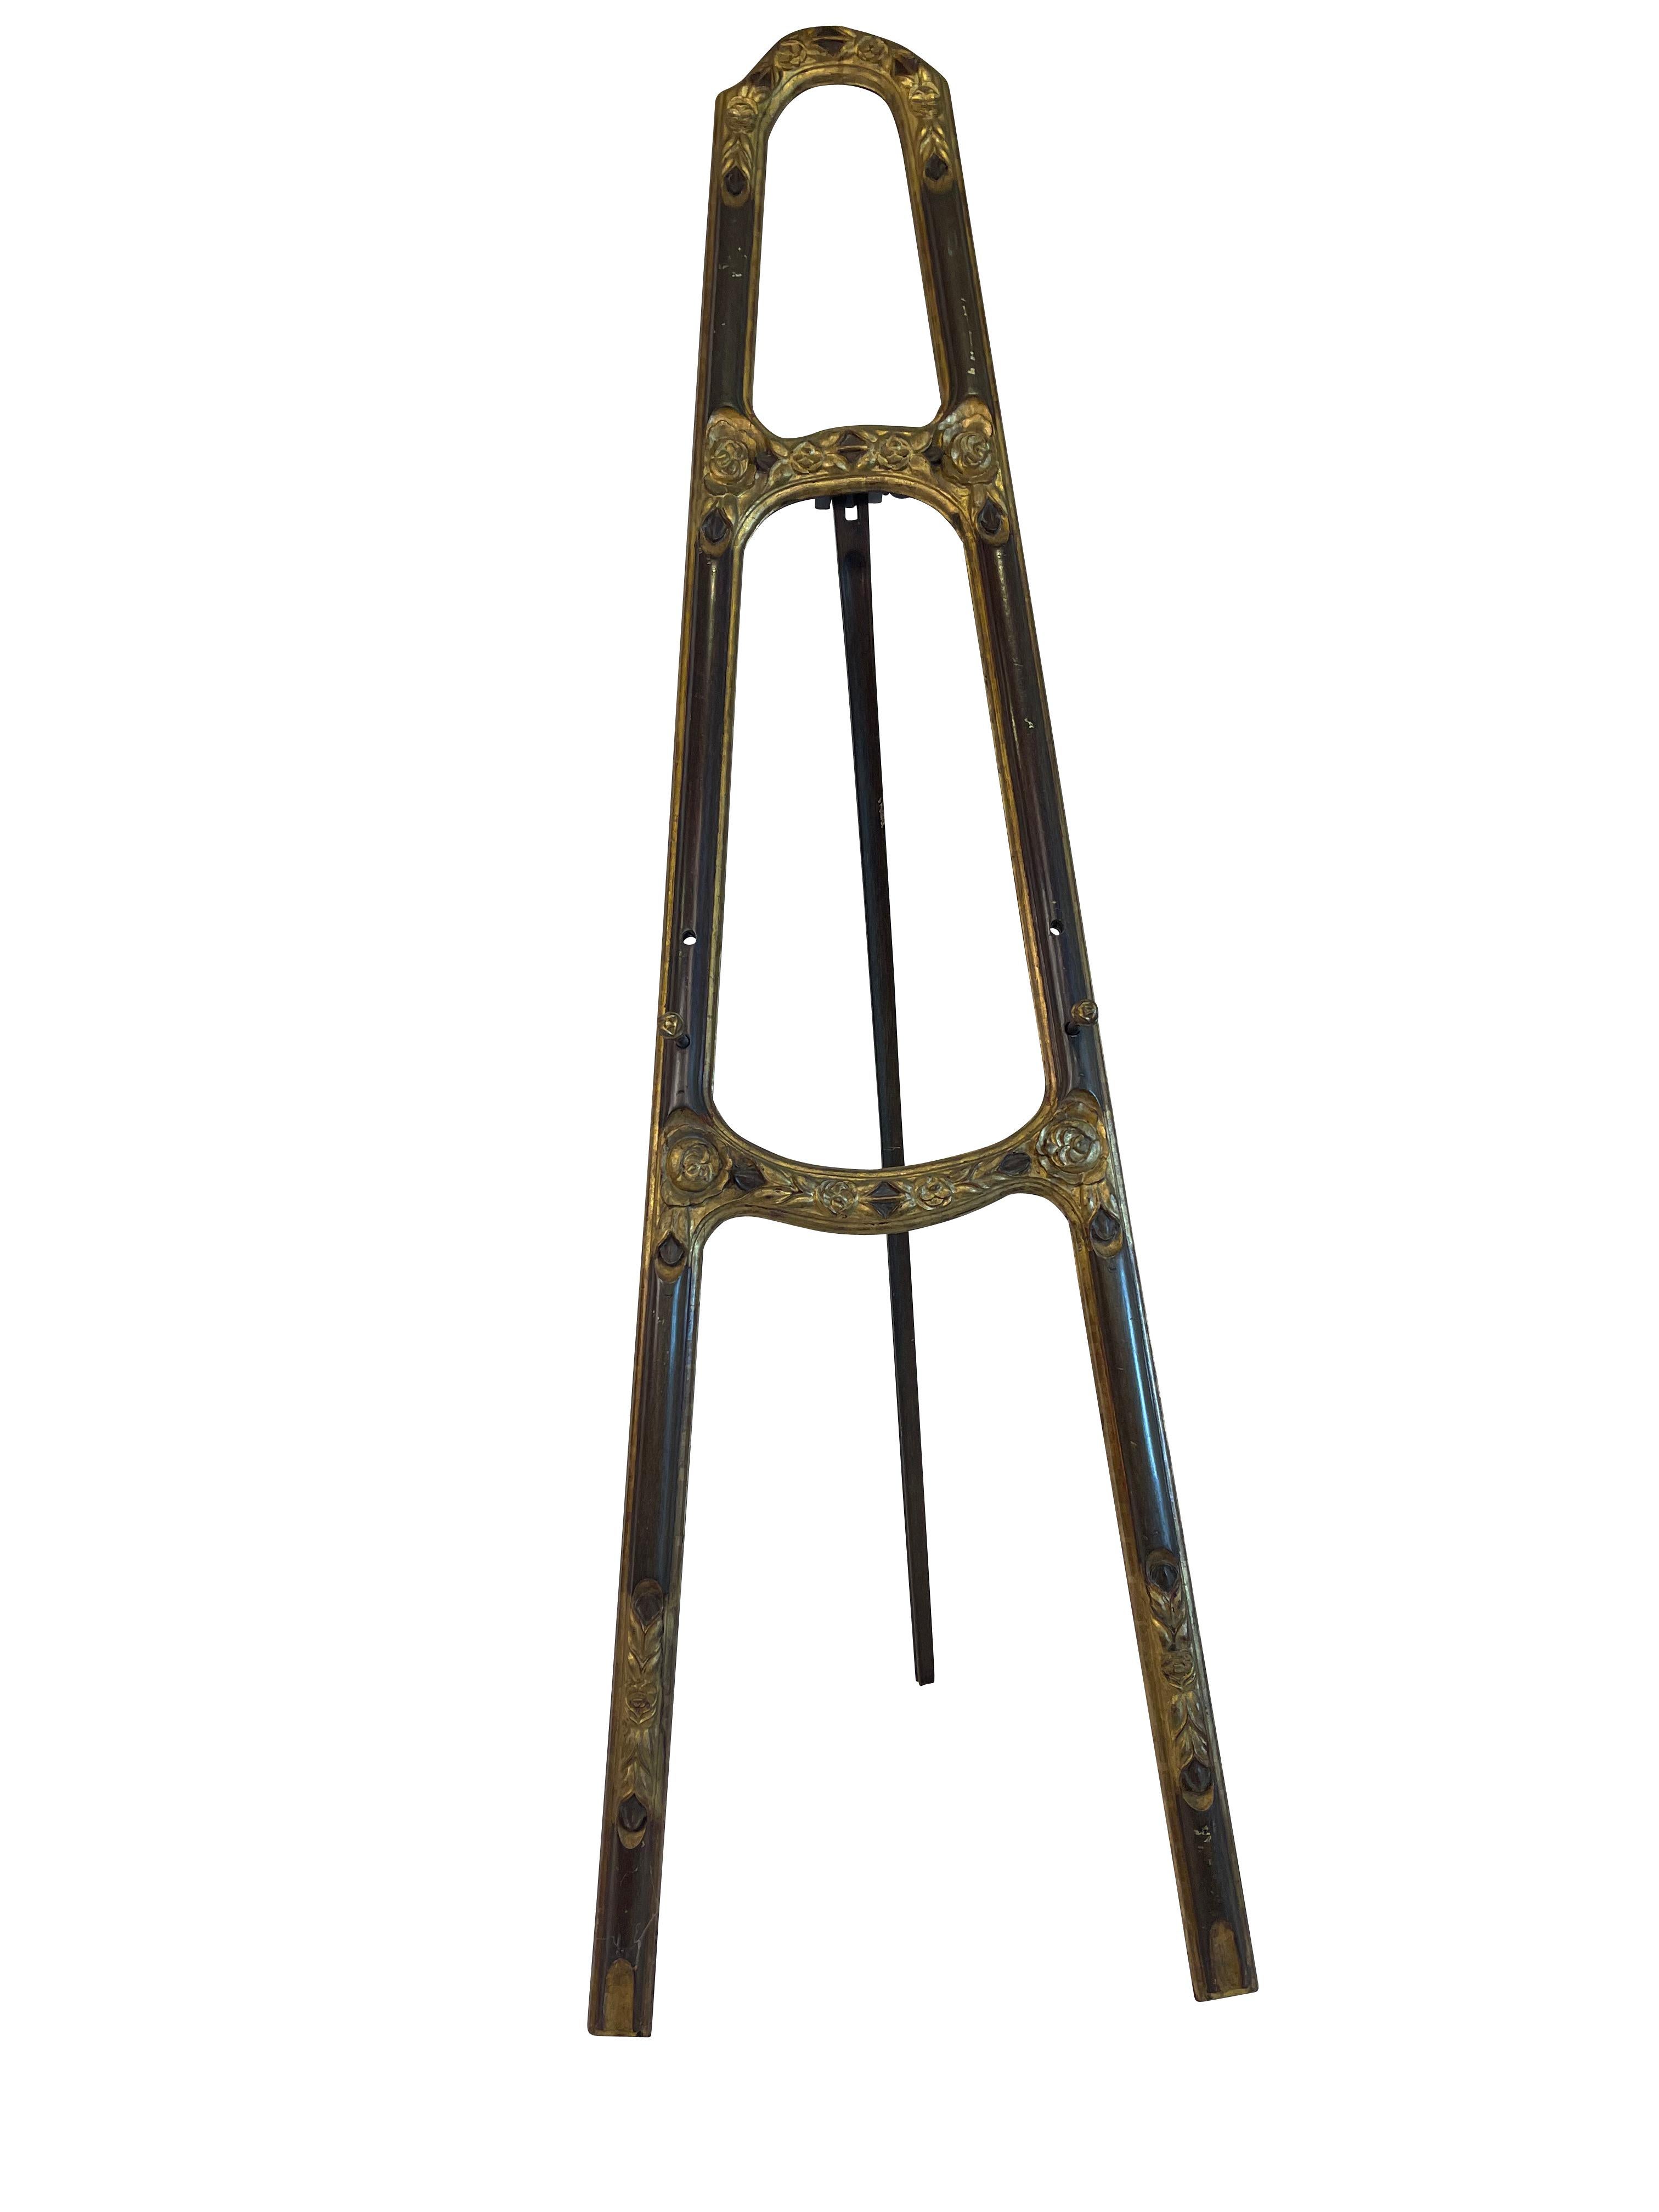 Interesting continental hand-carved painting easel with gilt decoration. Lovely gilded carved- rosette decoration and graceful legs. small dowels adjust t hold different sizes of artwork. Very sturdy. Perfect for displaying artwork or signage for an